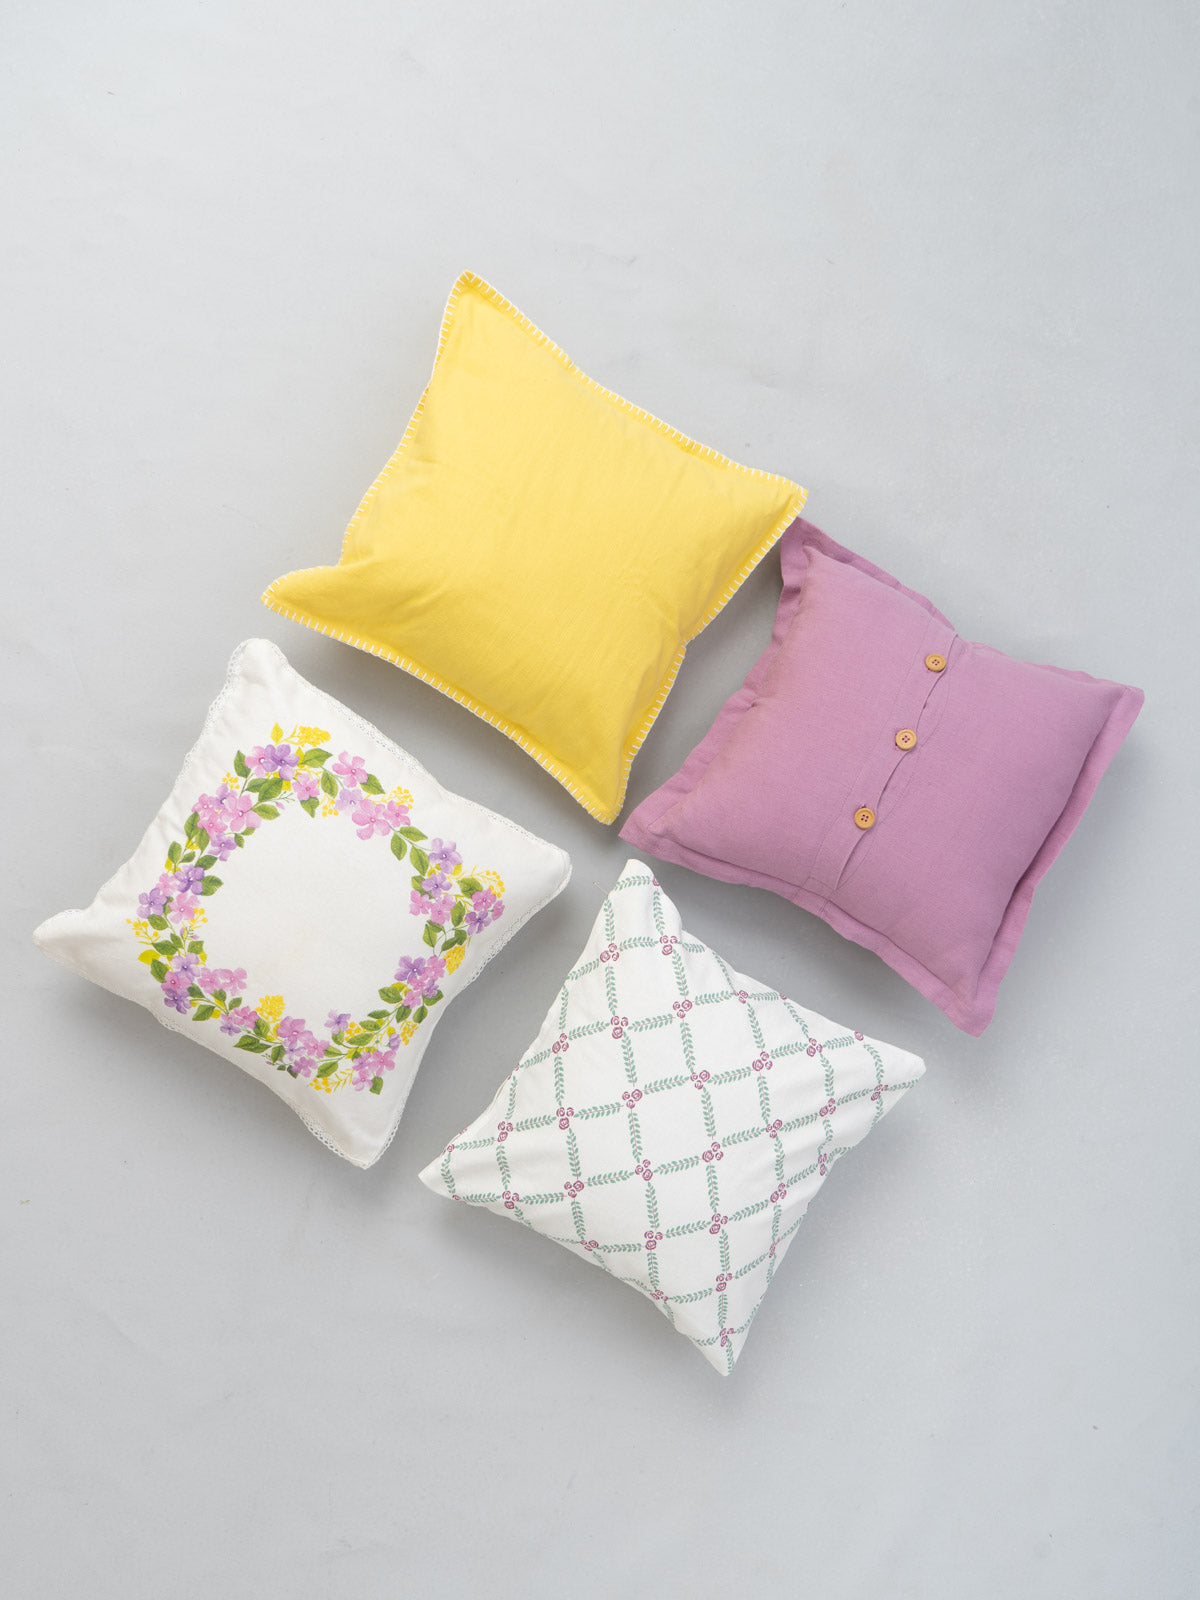 Very Peri Wreath, Dusty Lavender, Solid Primrose Yellow, Climbing Roses Lavender Set Of 4 Combo Cotton Cushion Cover - Yellow And Lavender